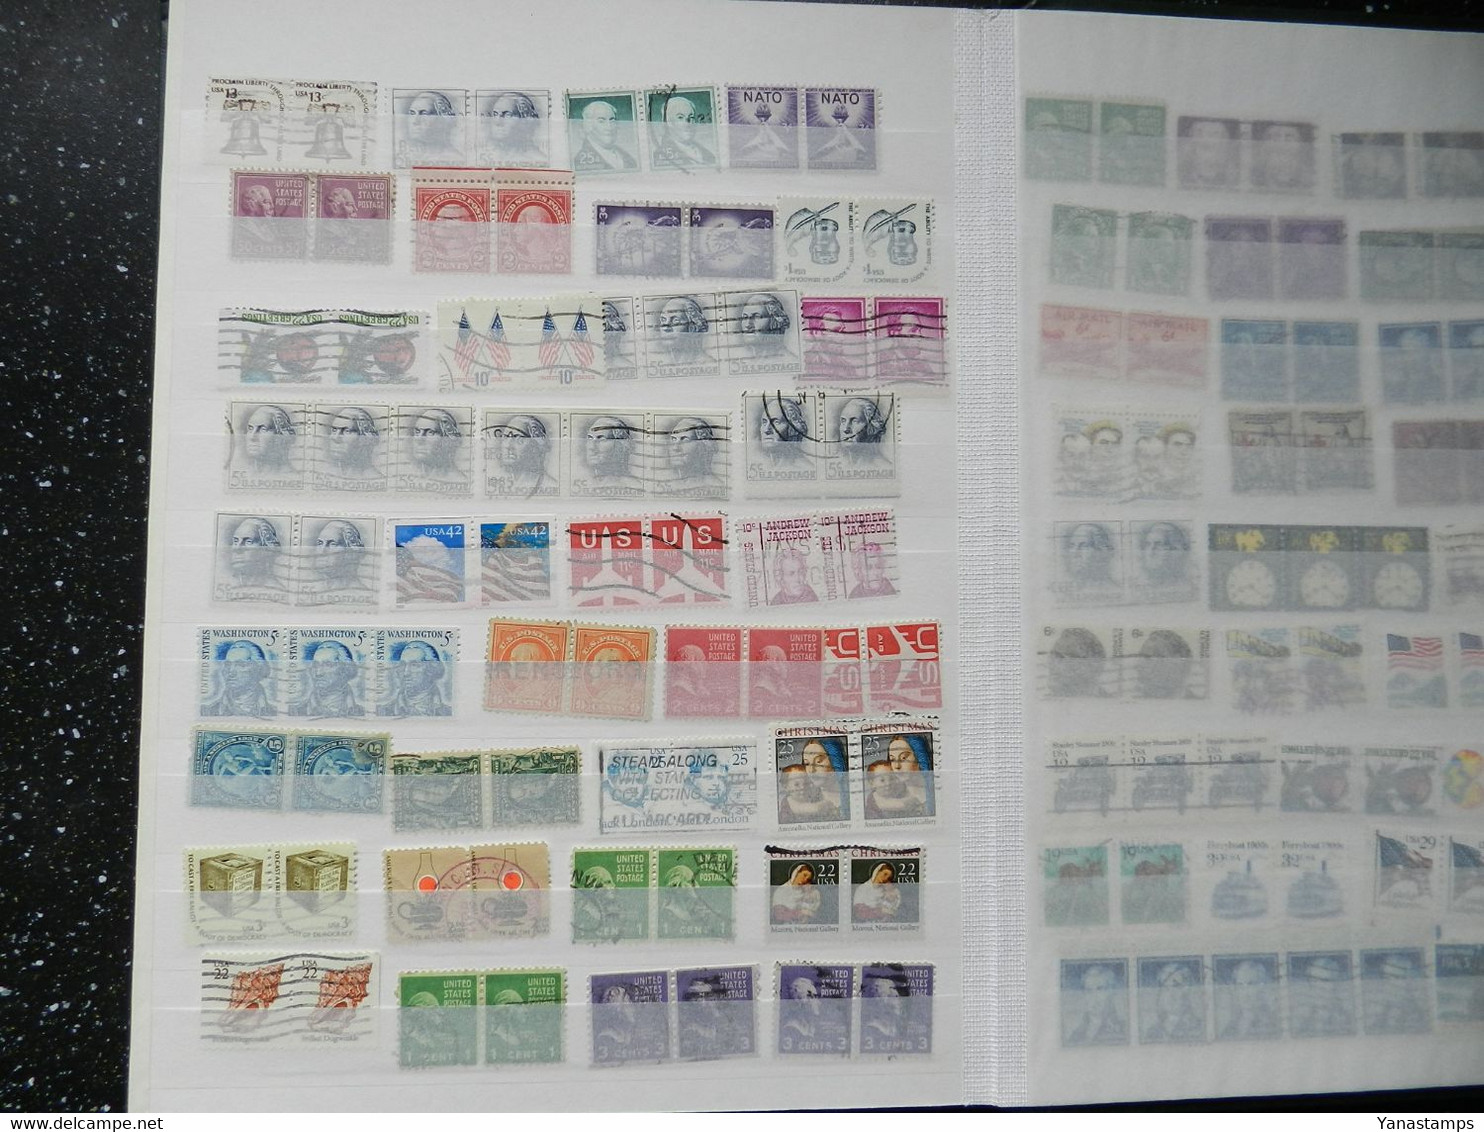 U.S.A. : nice slection of defs , over 1000 stamps, please look